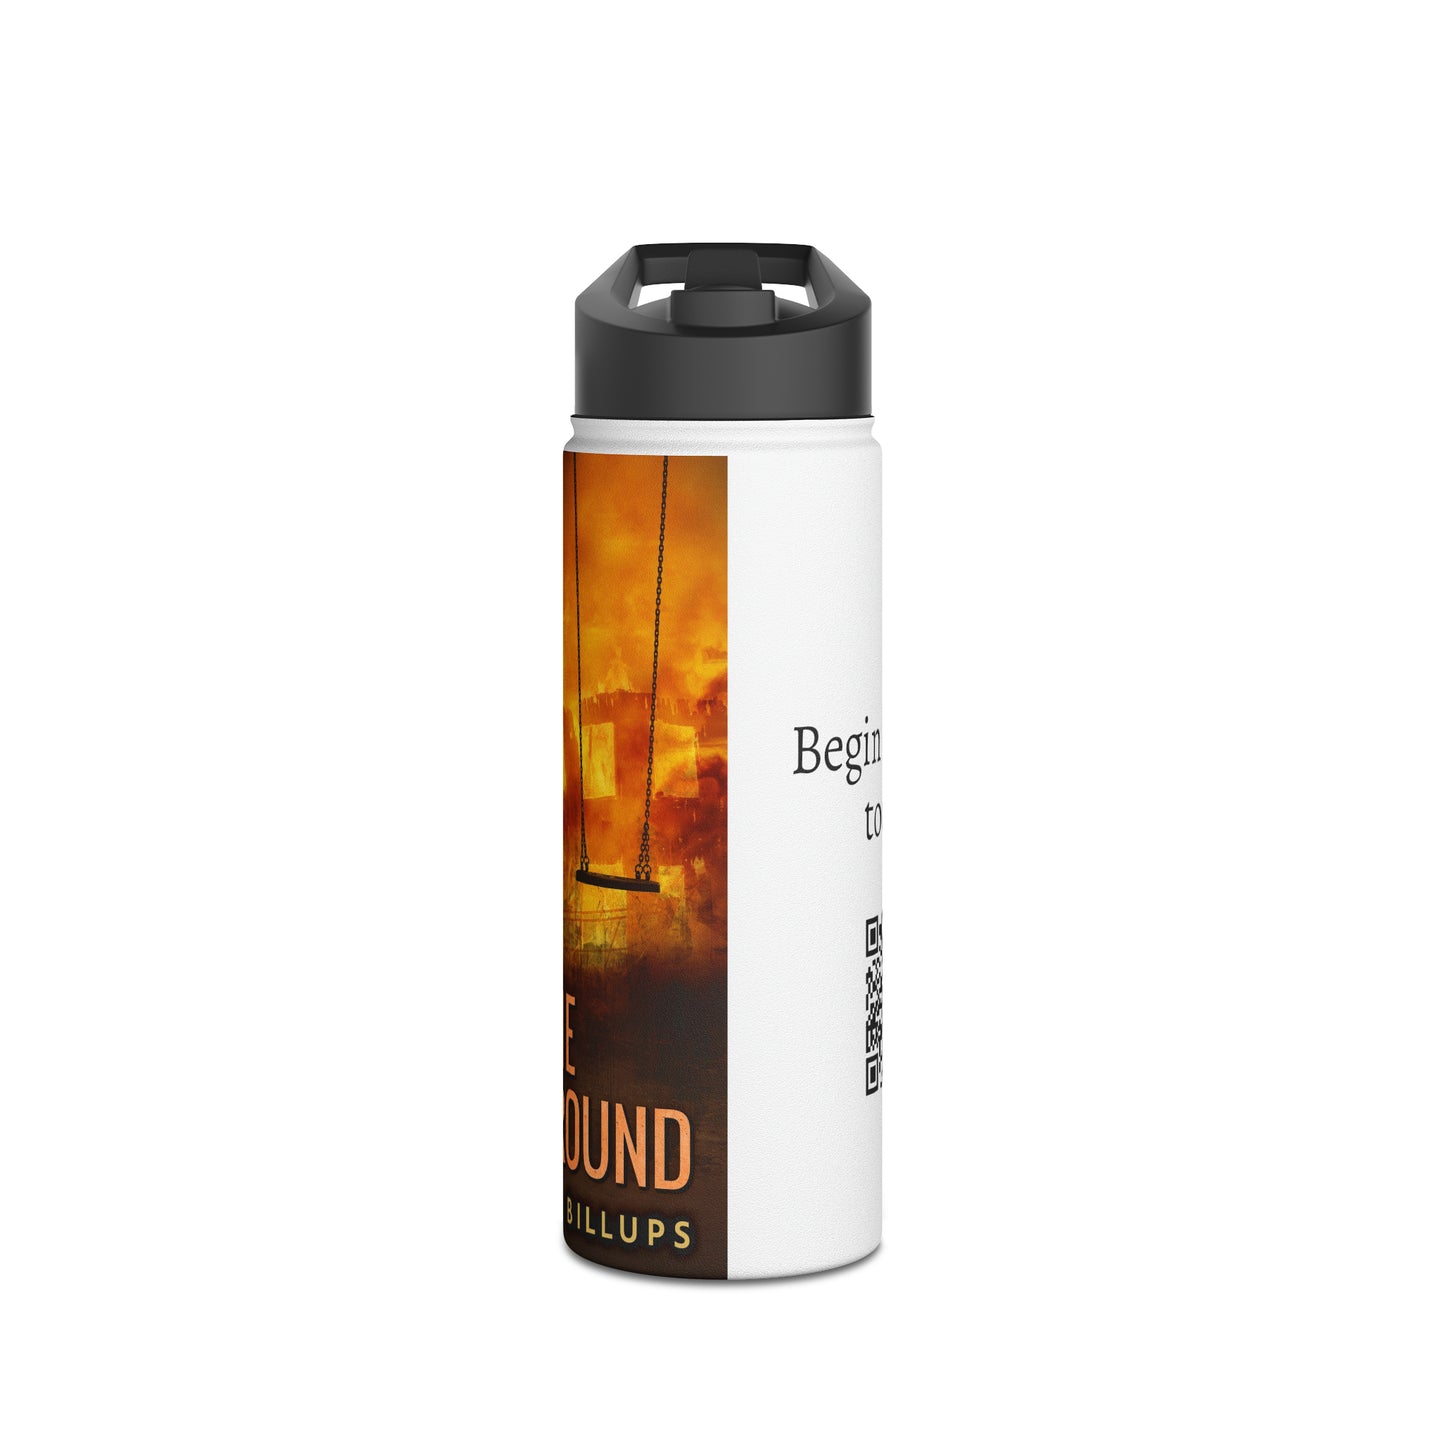 The Playground - Stainless Steel Water Bottle